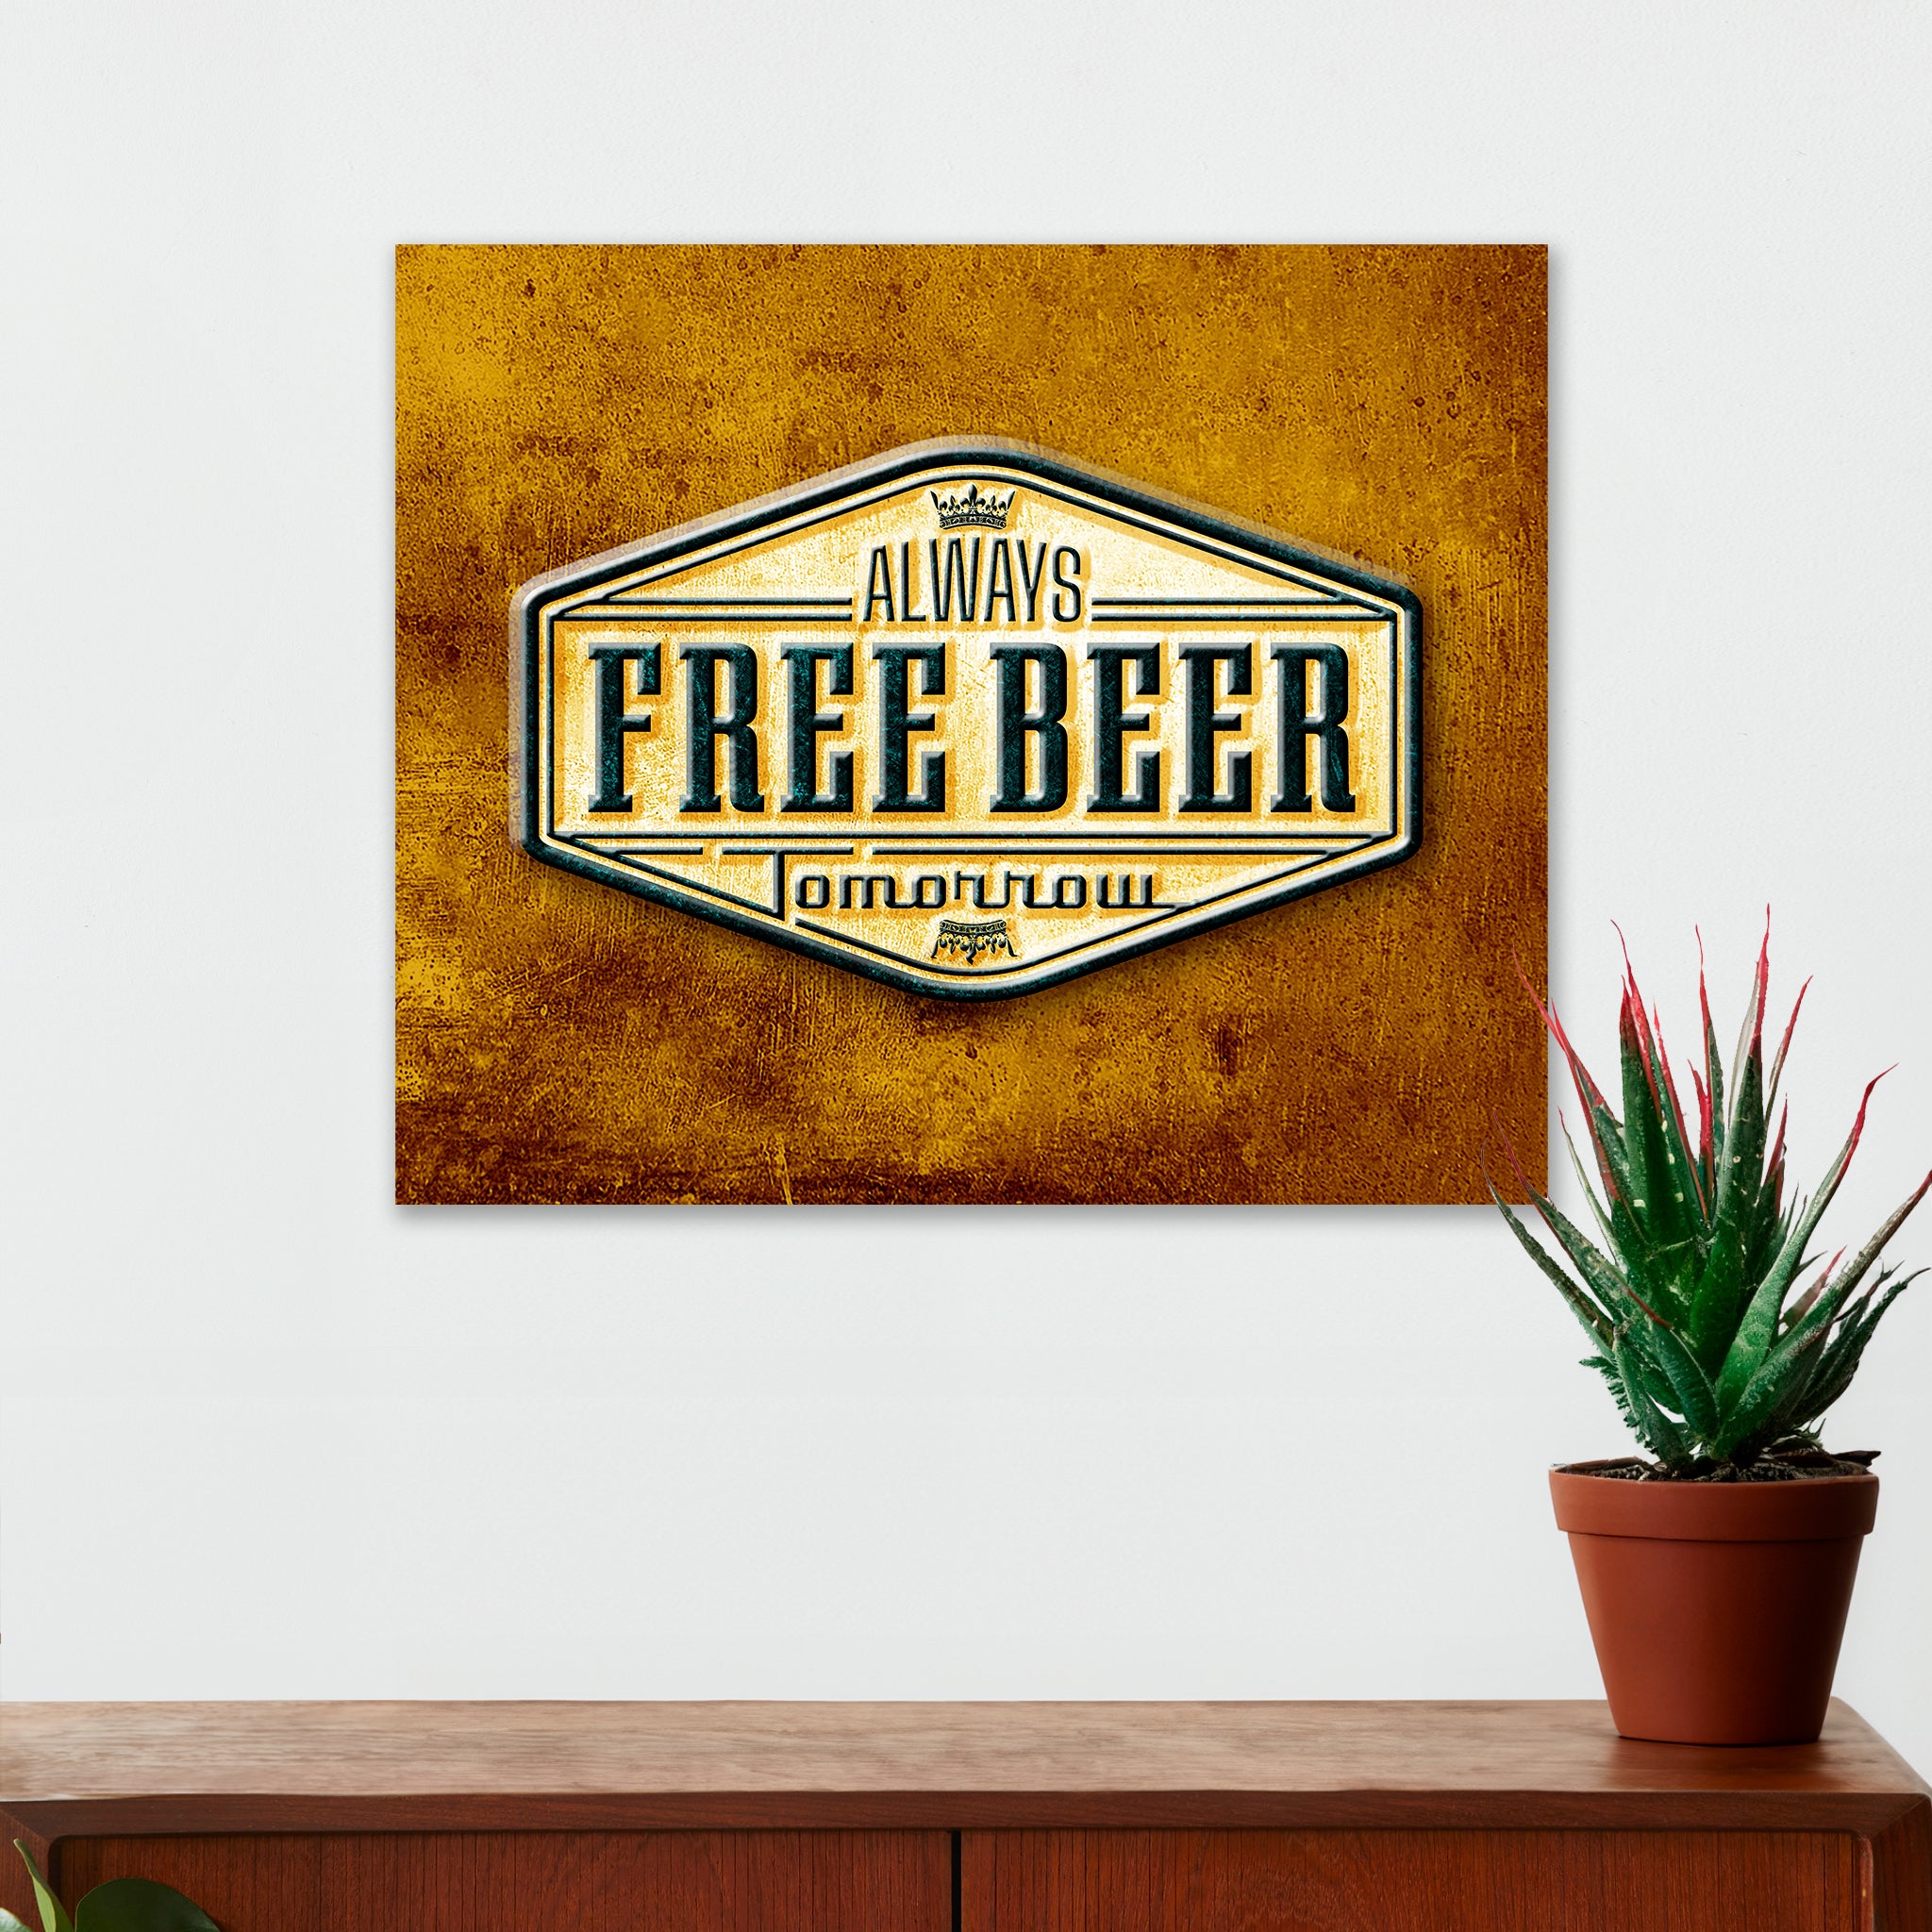 Man Cave Wall Decor - Always Free Beer Tomorrow - Canvas Sign